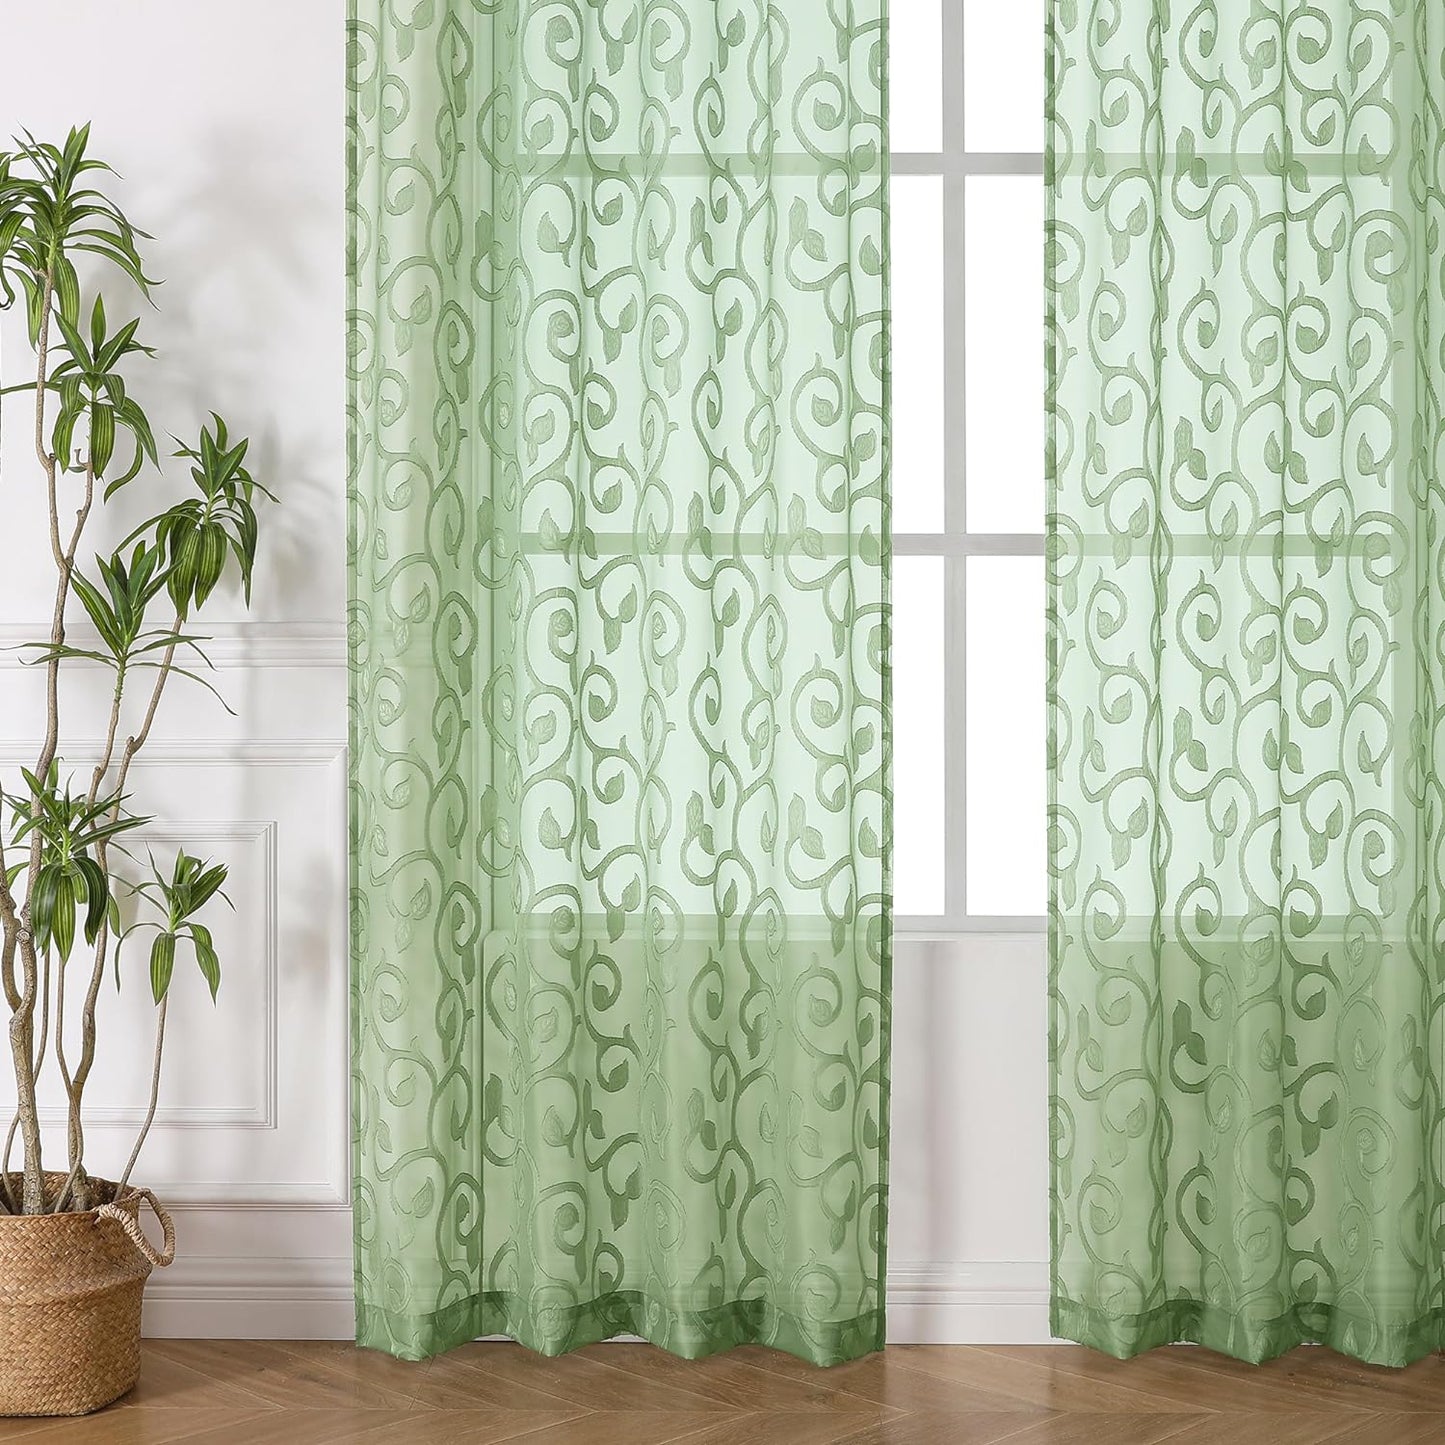 OWENIE Furman Sheer White Curtains 84 Inches Long for Bedroom Living Room 2 Panels Set, White Curtains Jacquard Clip Light Filtering Semi Sheer Curtain Transparent Rod Pocket Window Drapes, 2 Pcs  OWENIE Yellow Green 40W X 84L 